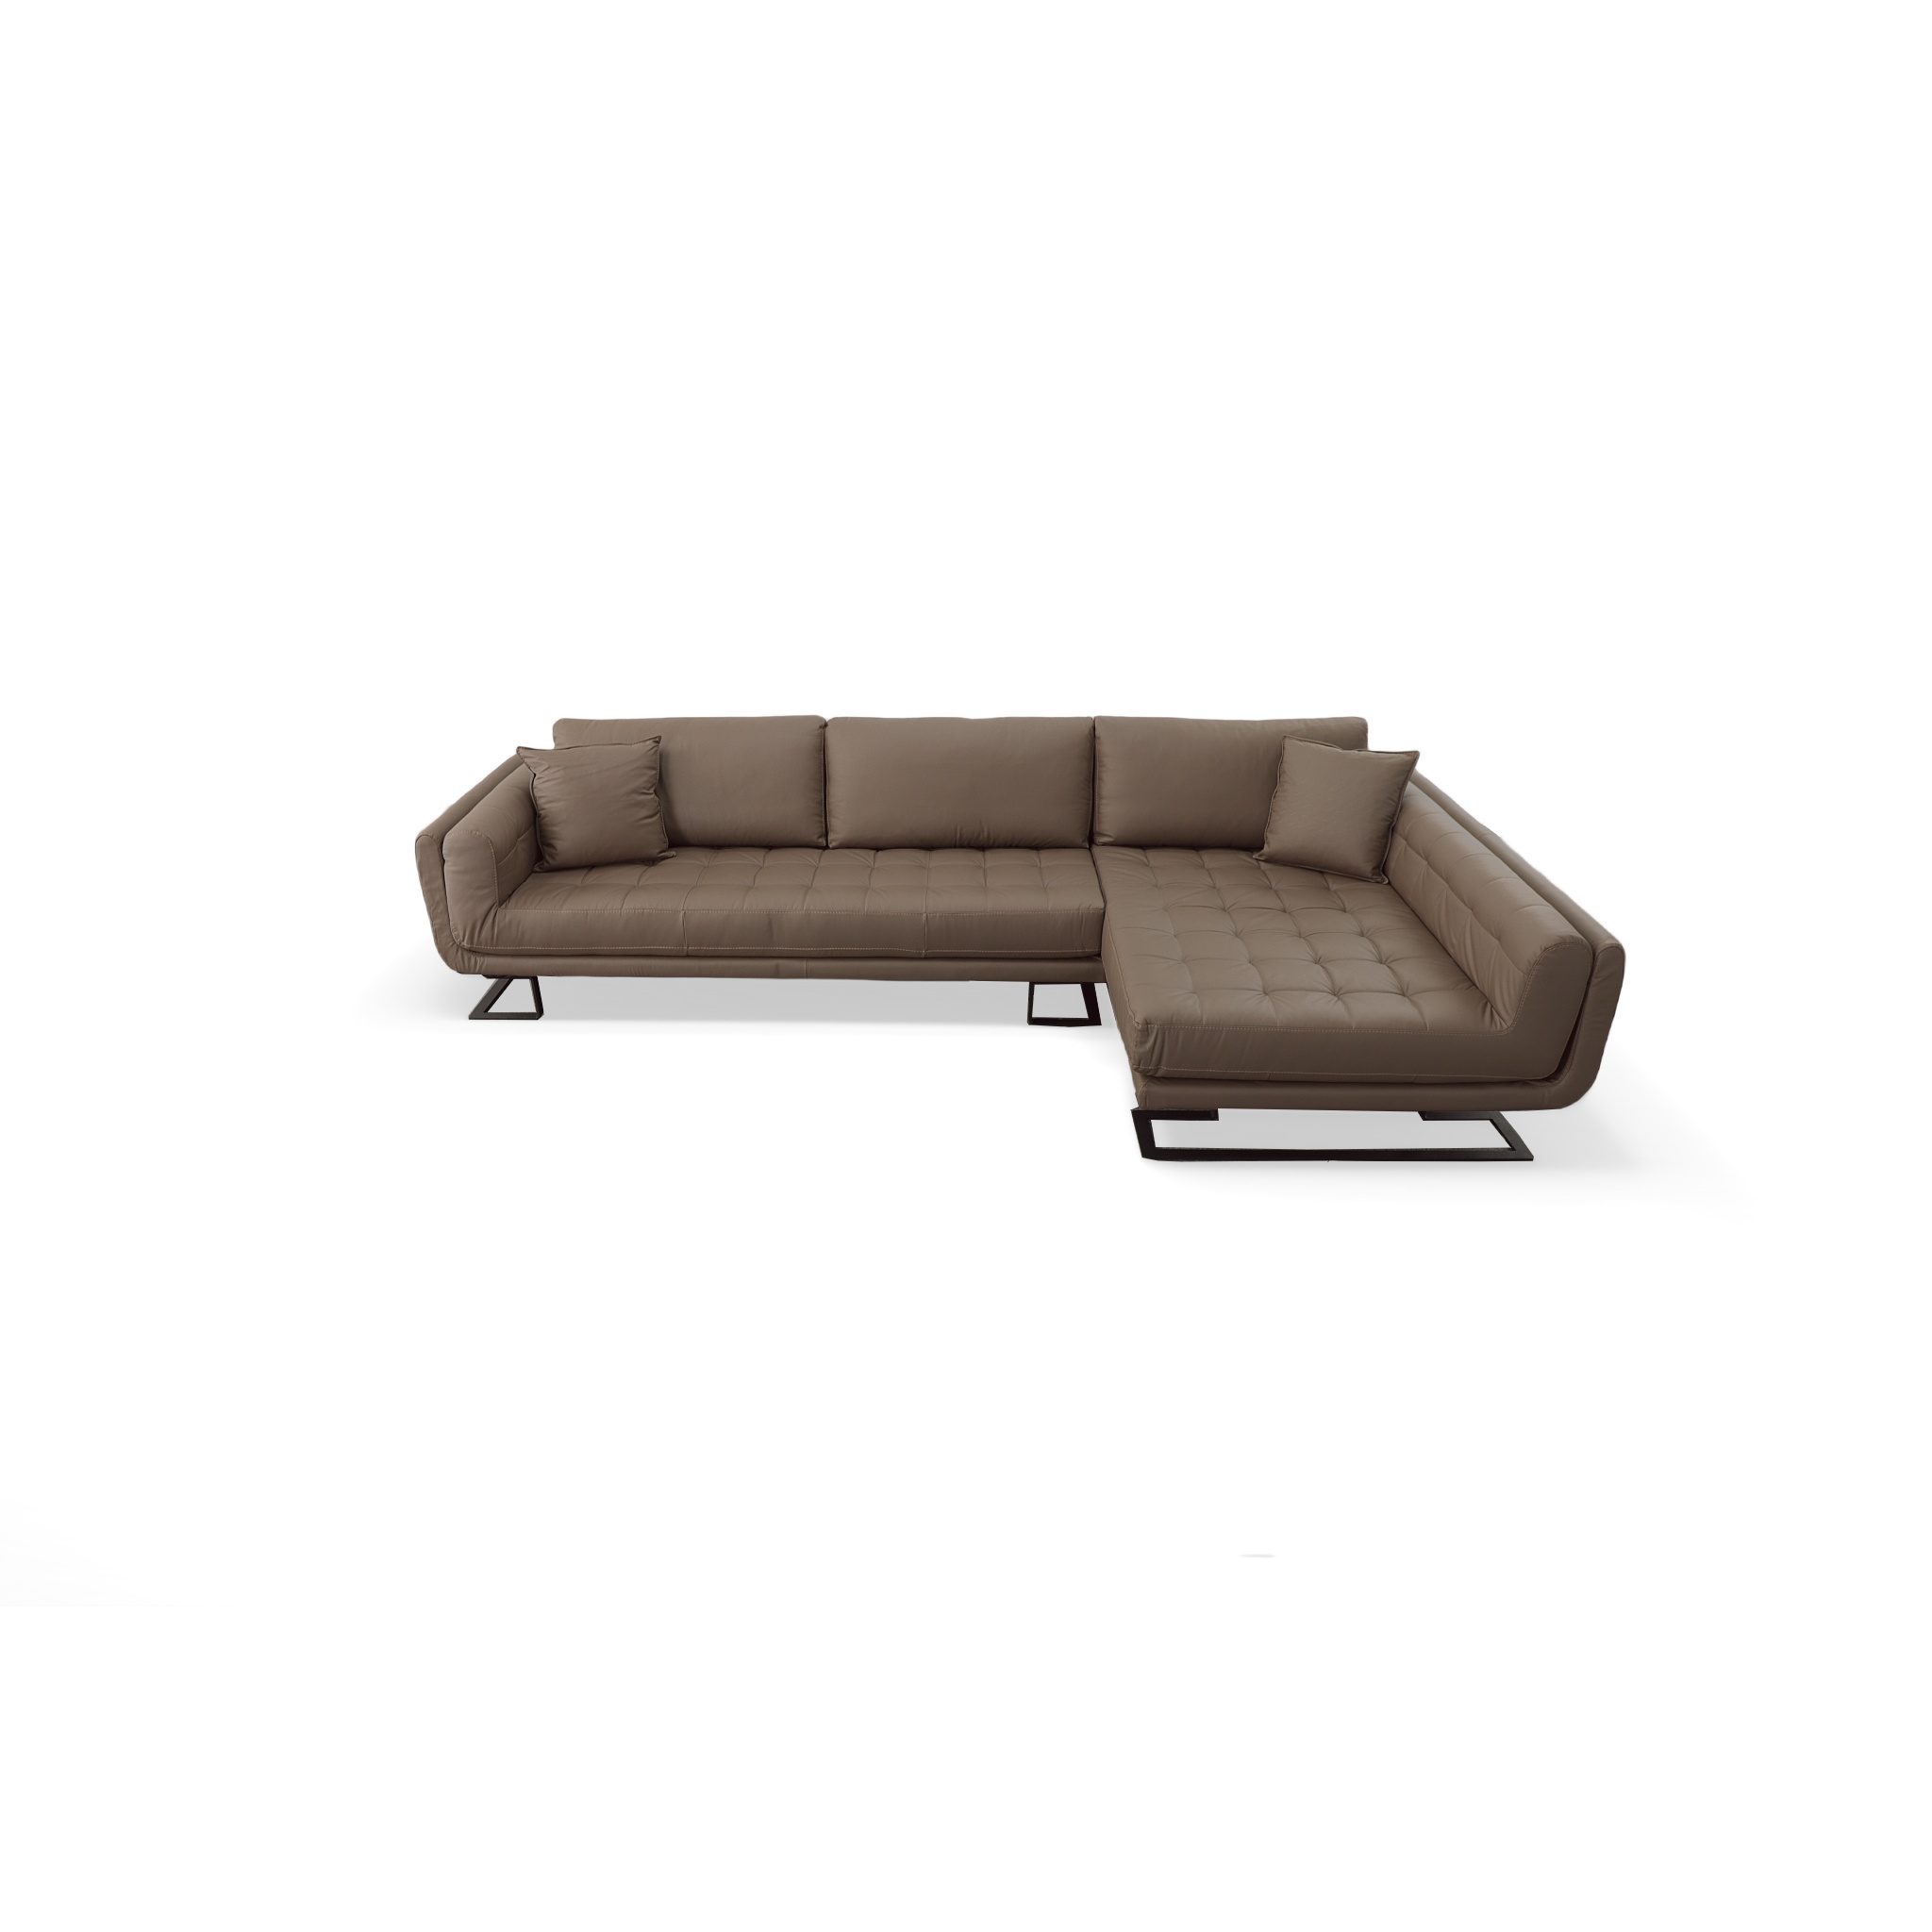 Brava Leather Sofa with Chaise